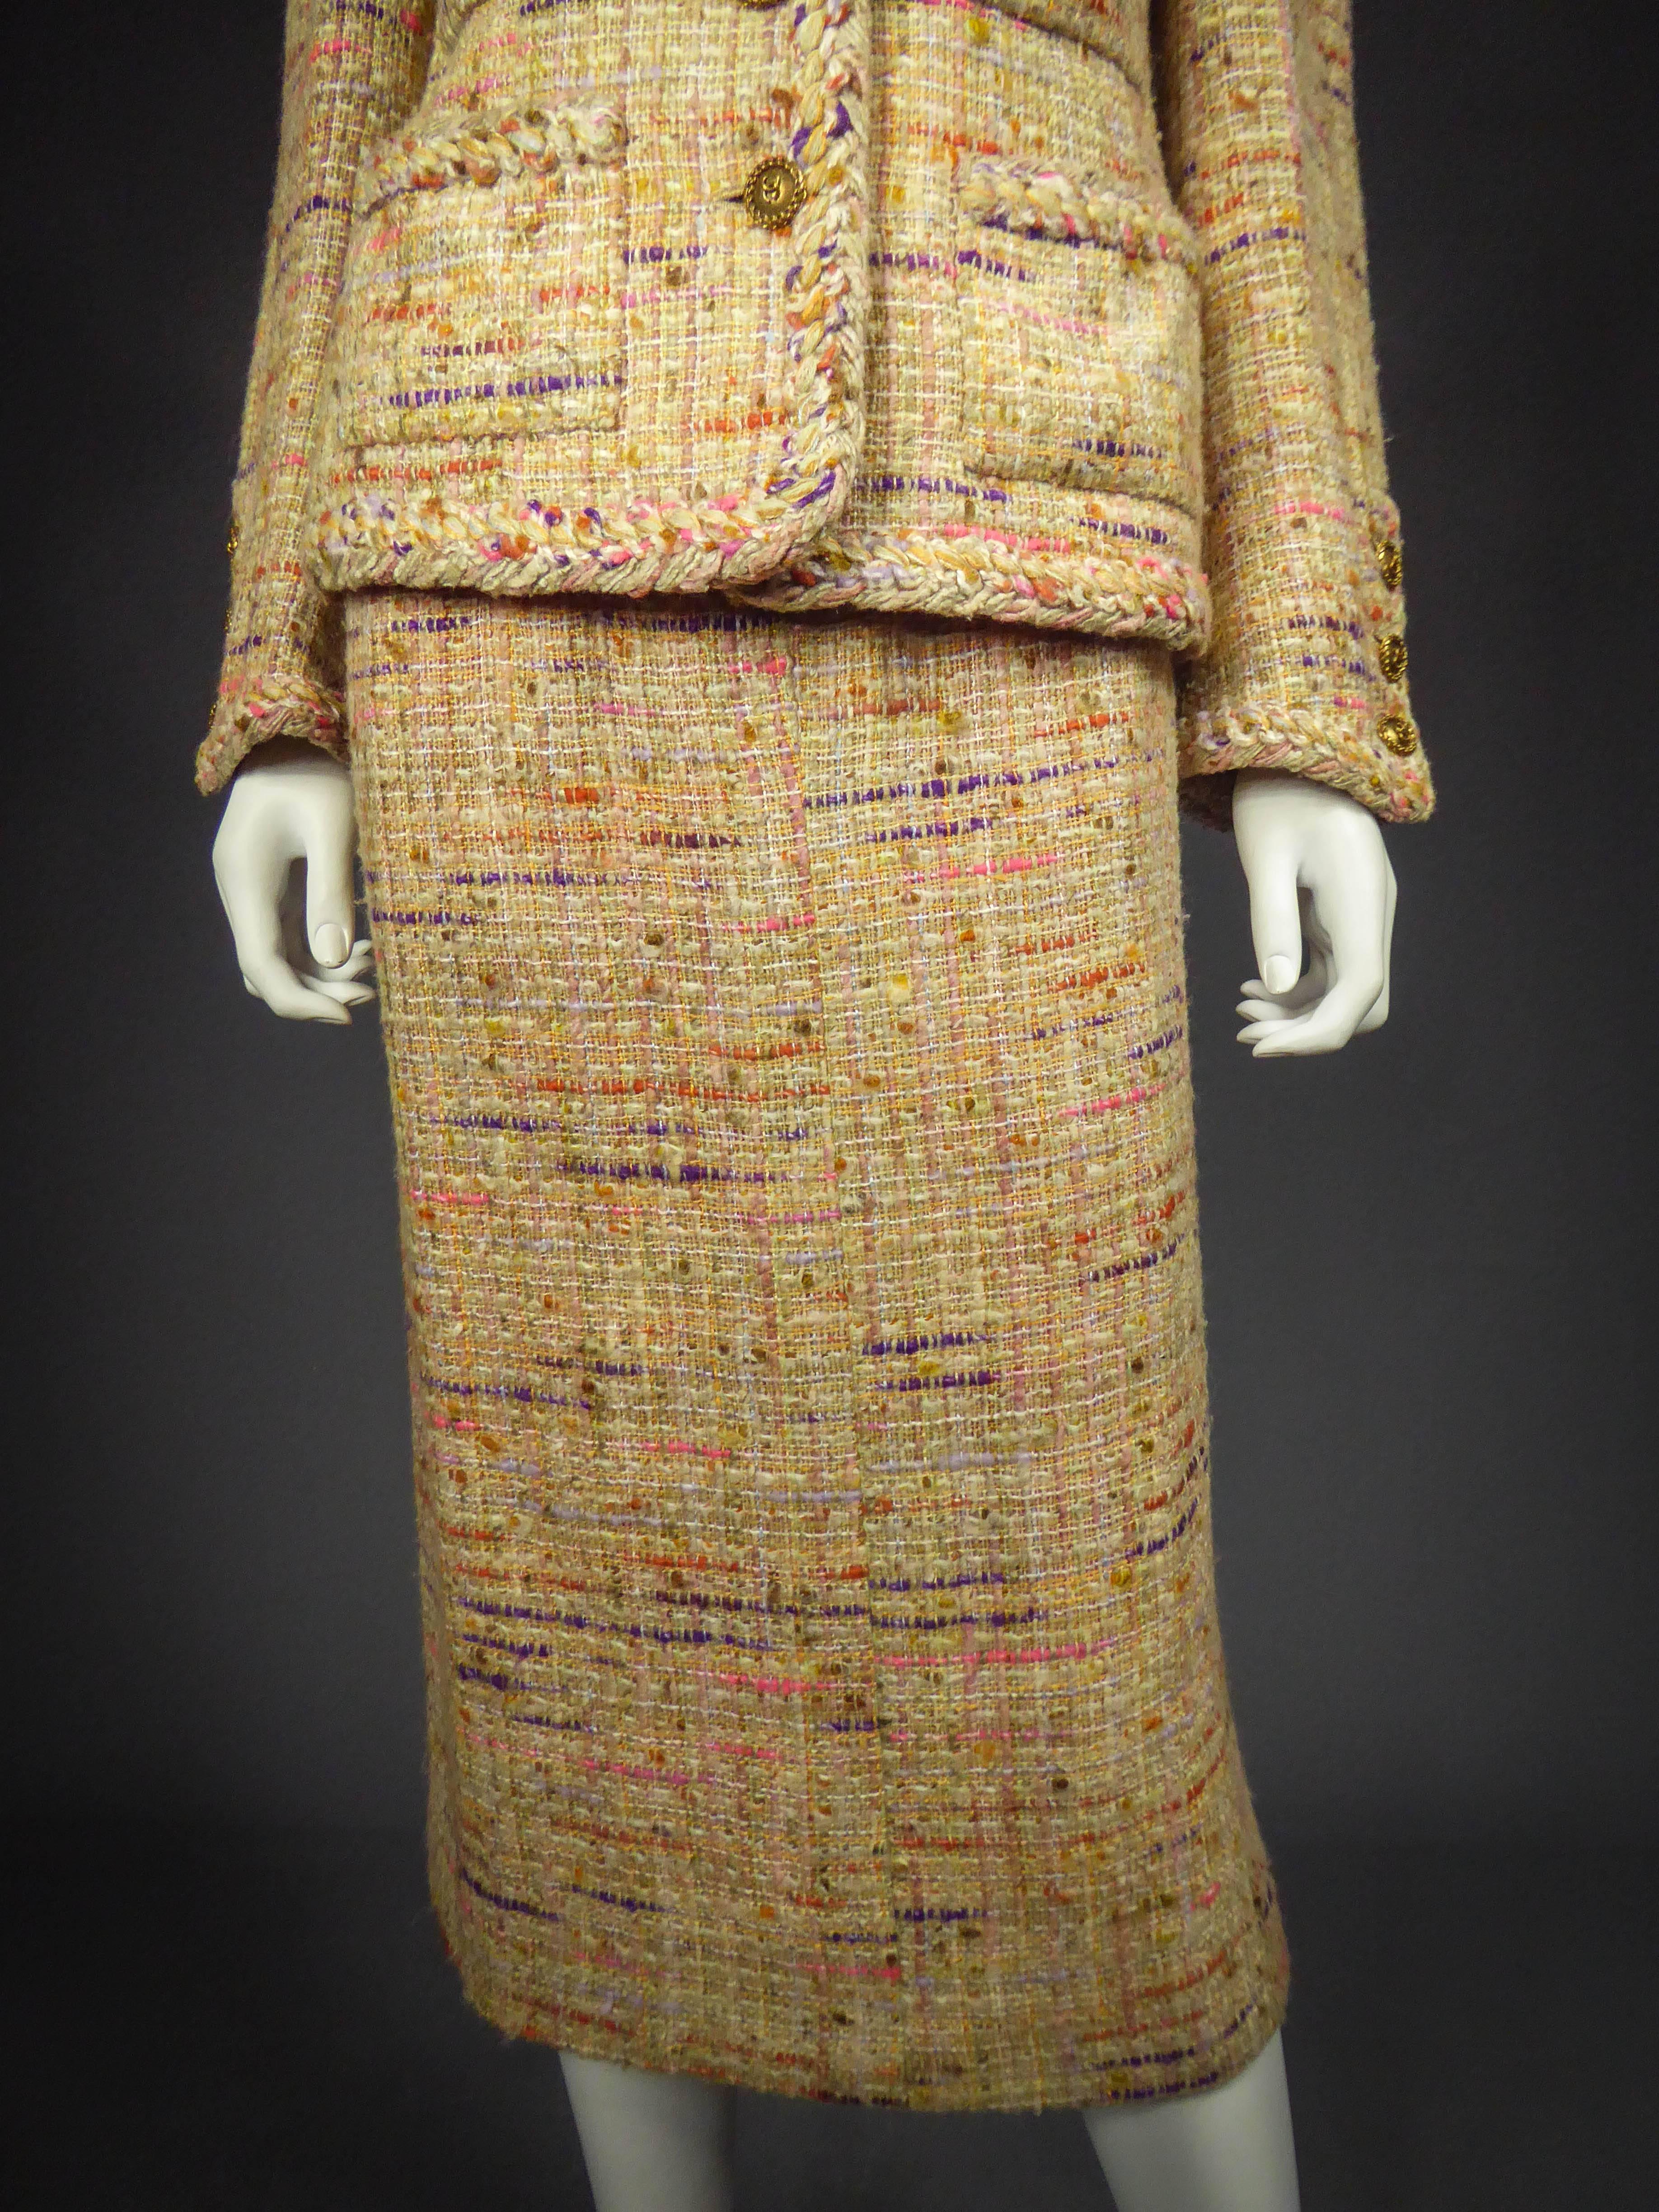 Circa 1979

France

Set skirt and jacket suit Chanel in flecked polychrome wool knit in shades of brown, purple, cream, yellow and blue sky. Jacket with small shoulder pads, pockets and cuffs entirely edged with a wool braid in the same fabric.